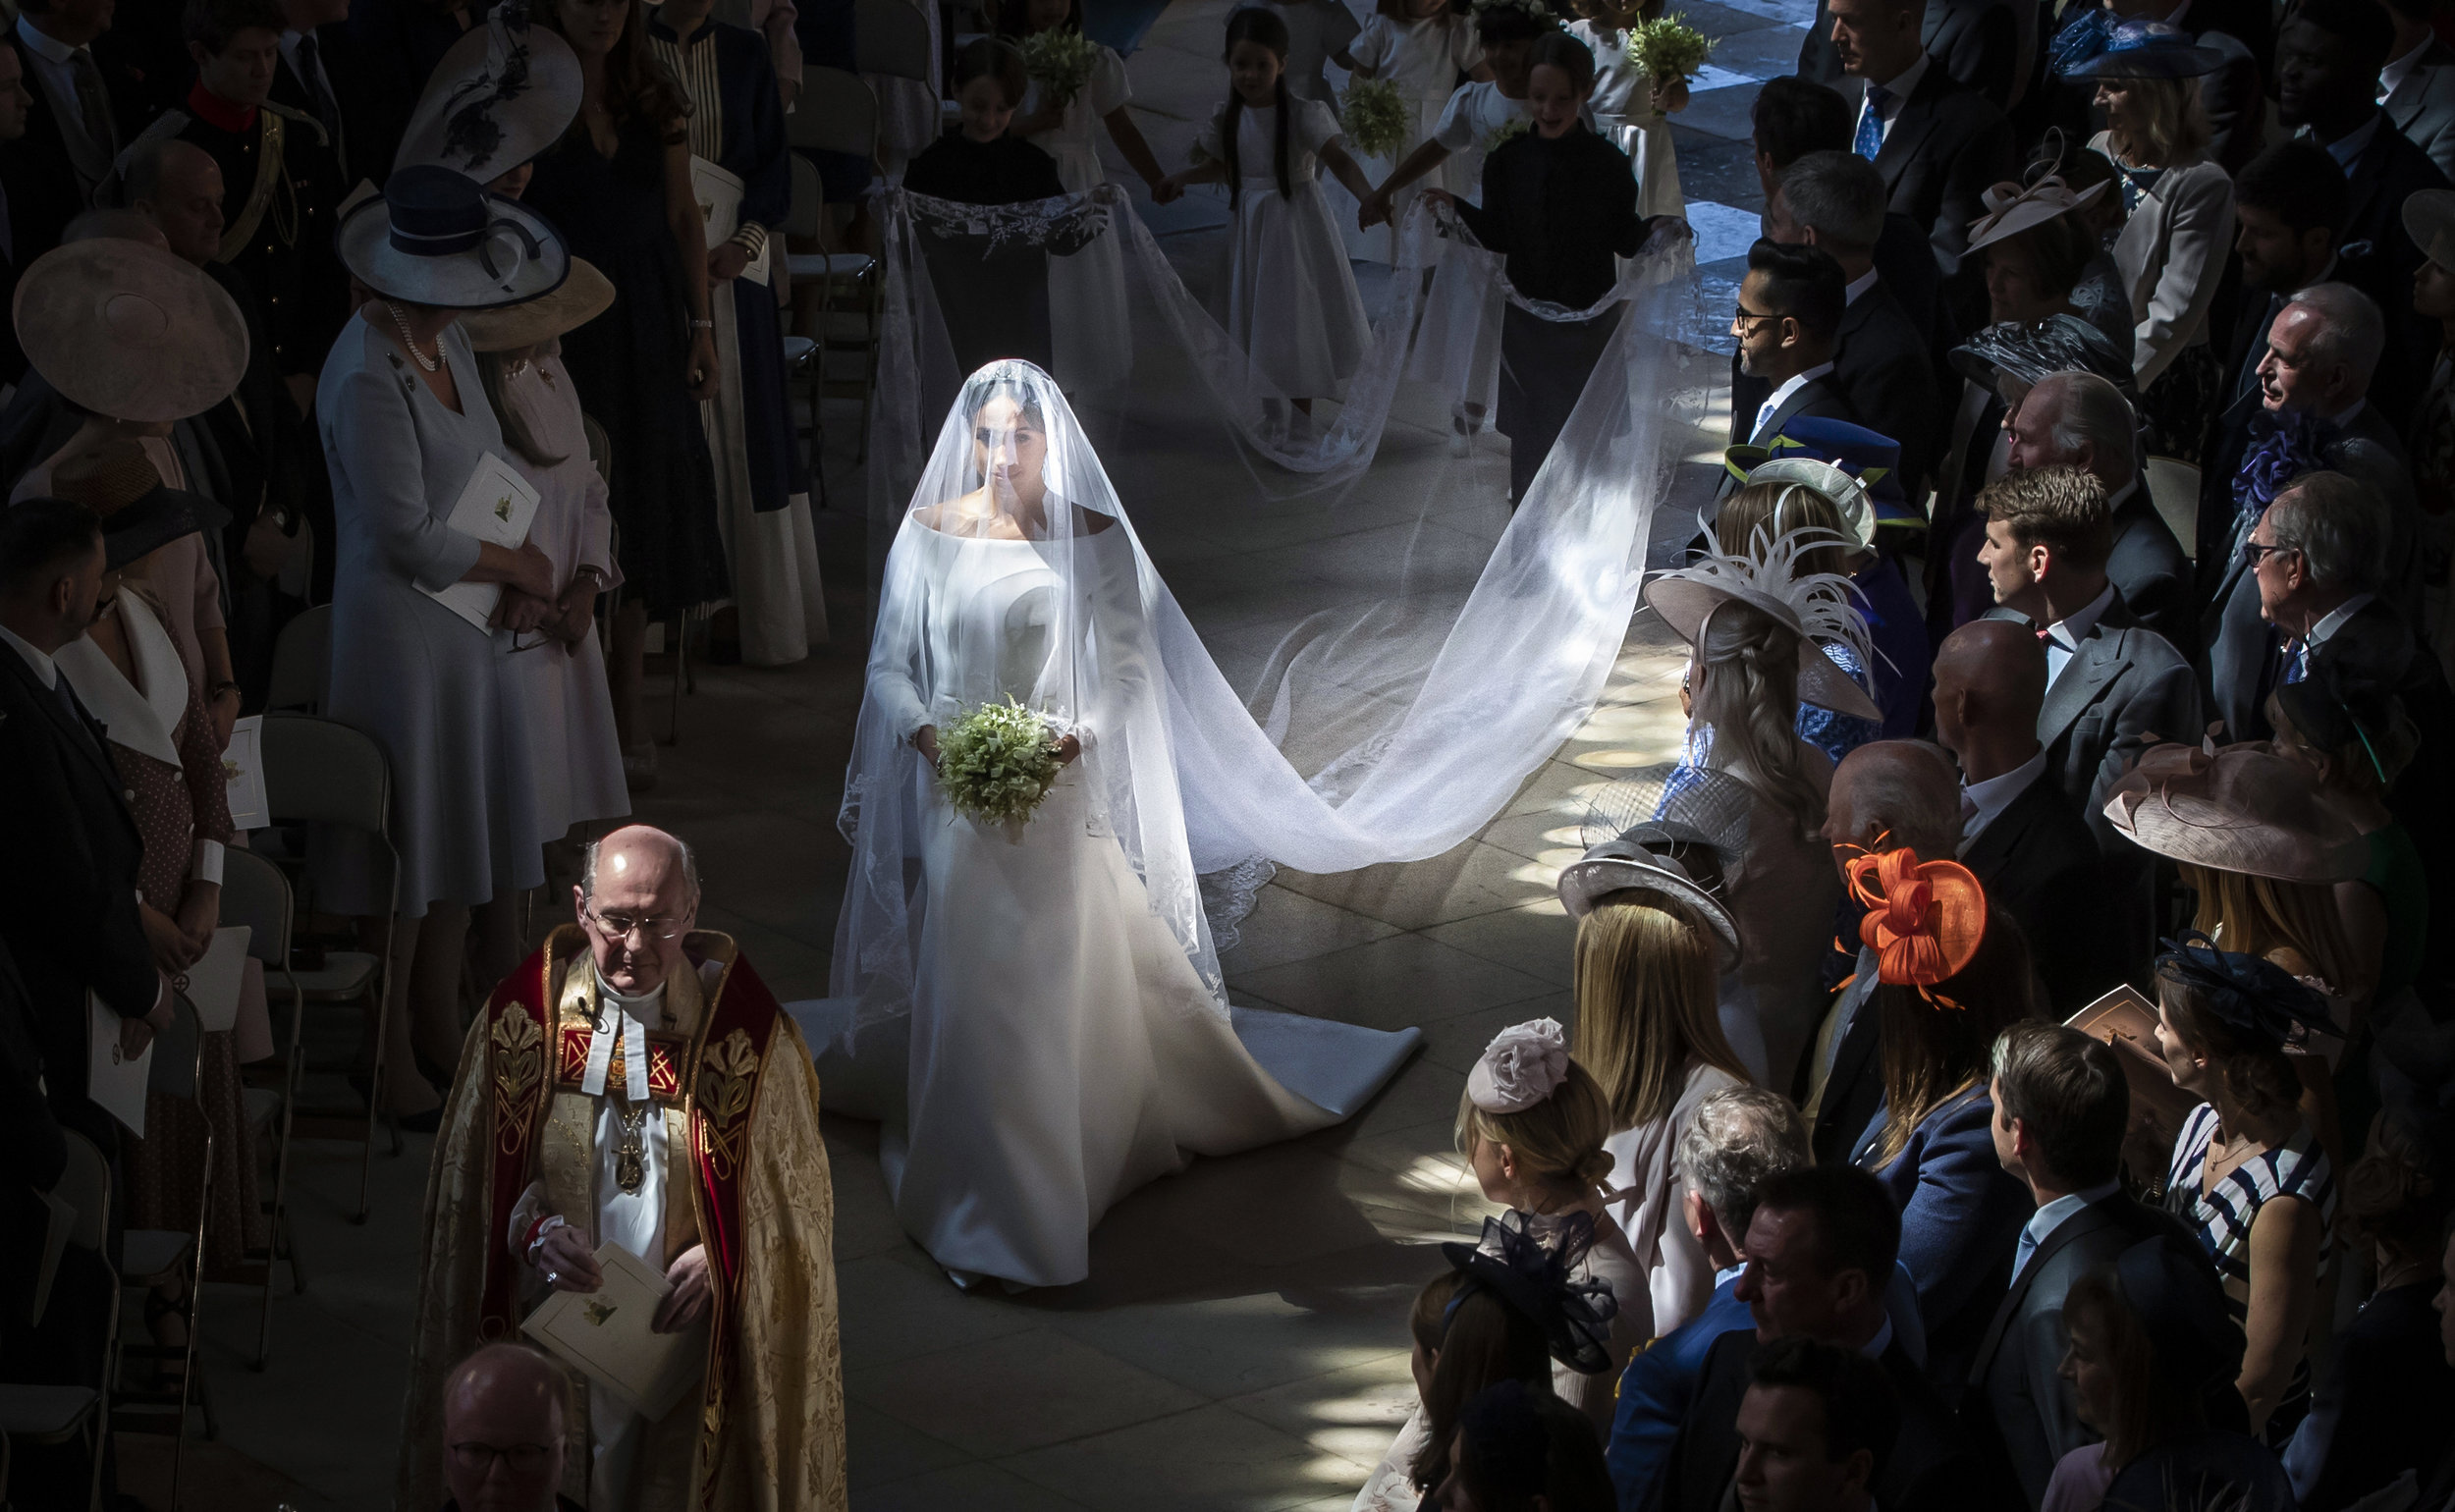  Meghan Markle walks down the aisle in St George's Chapel at Windsor Castle during her wedding to Prince Harry.
Photo by Danny Lawson, 19 May 2018
 